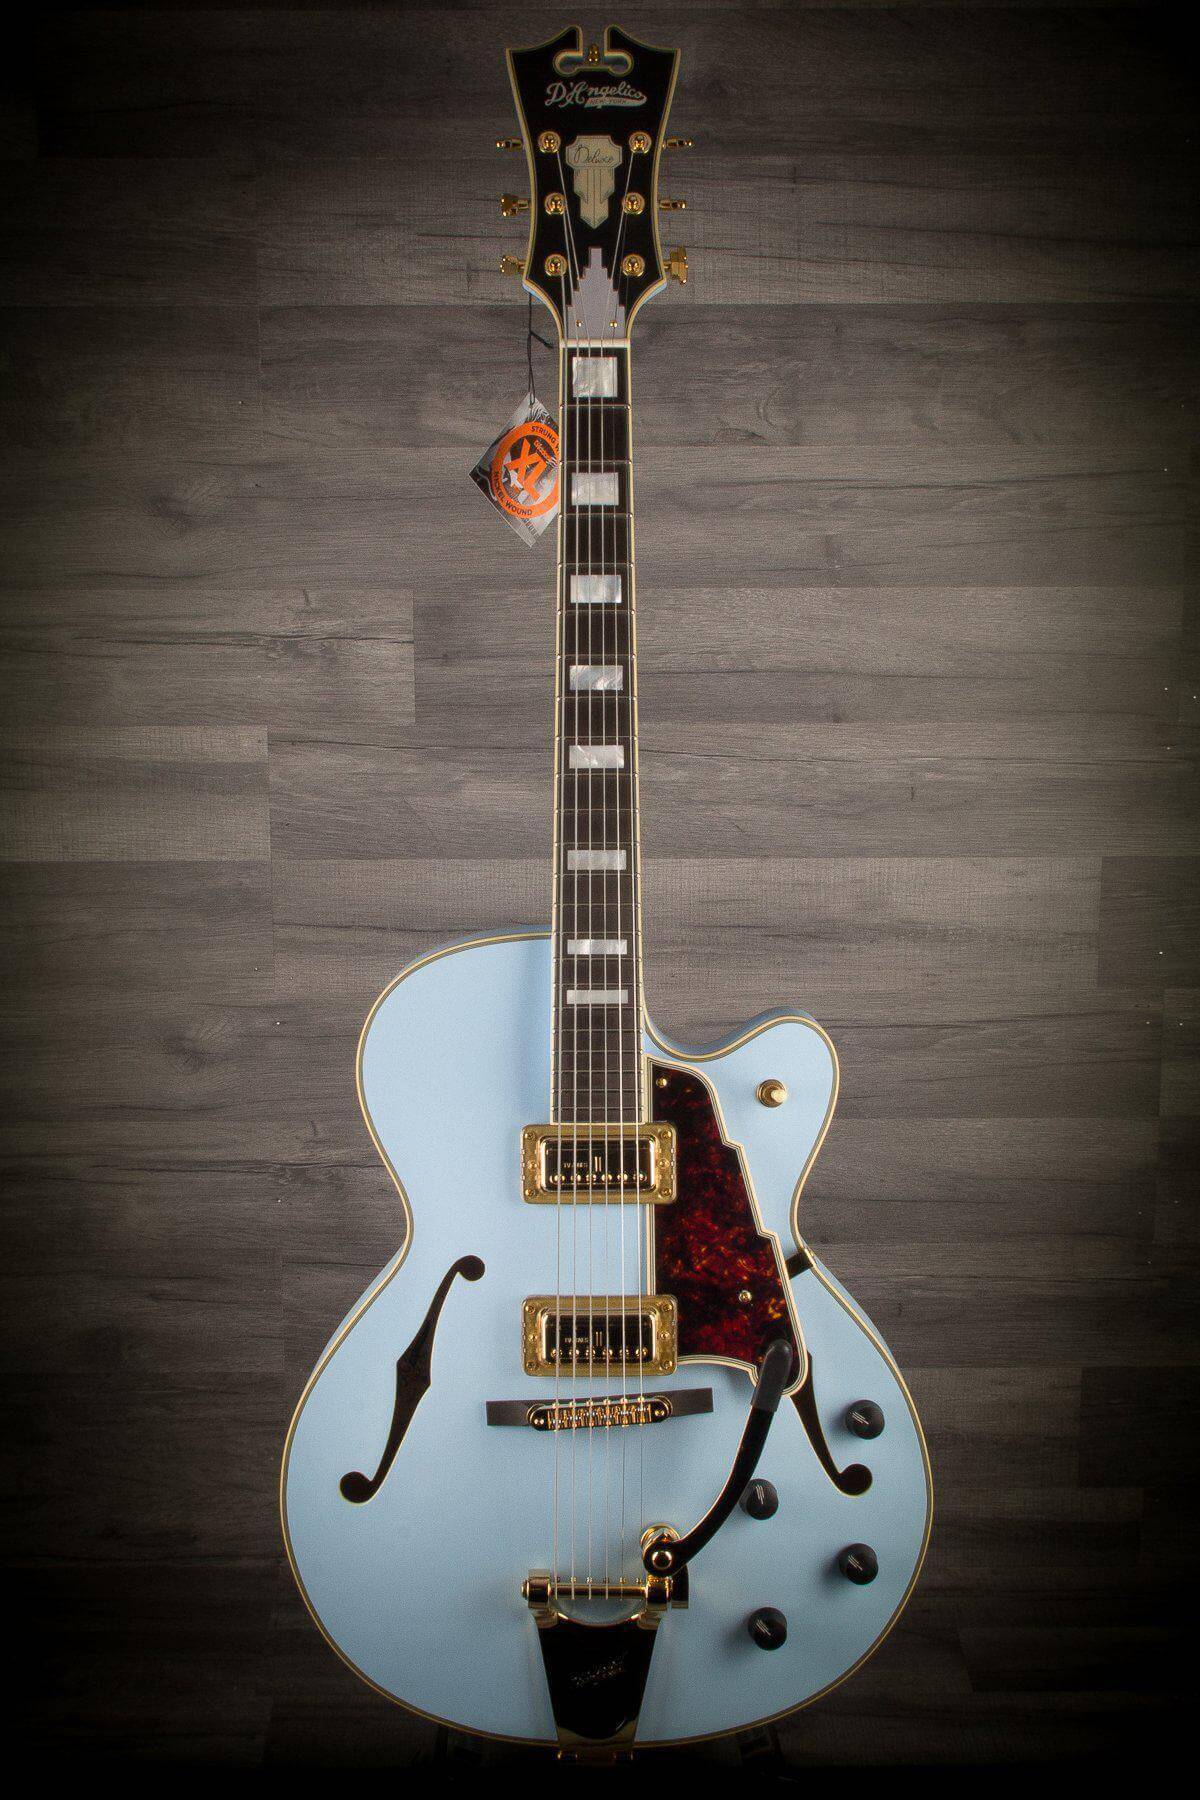 D'Angelico Electric Guitar D'Angelico Deluxe 175 - Matte Powder Blue